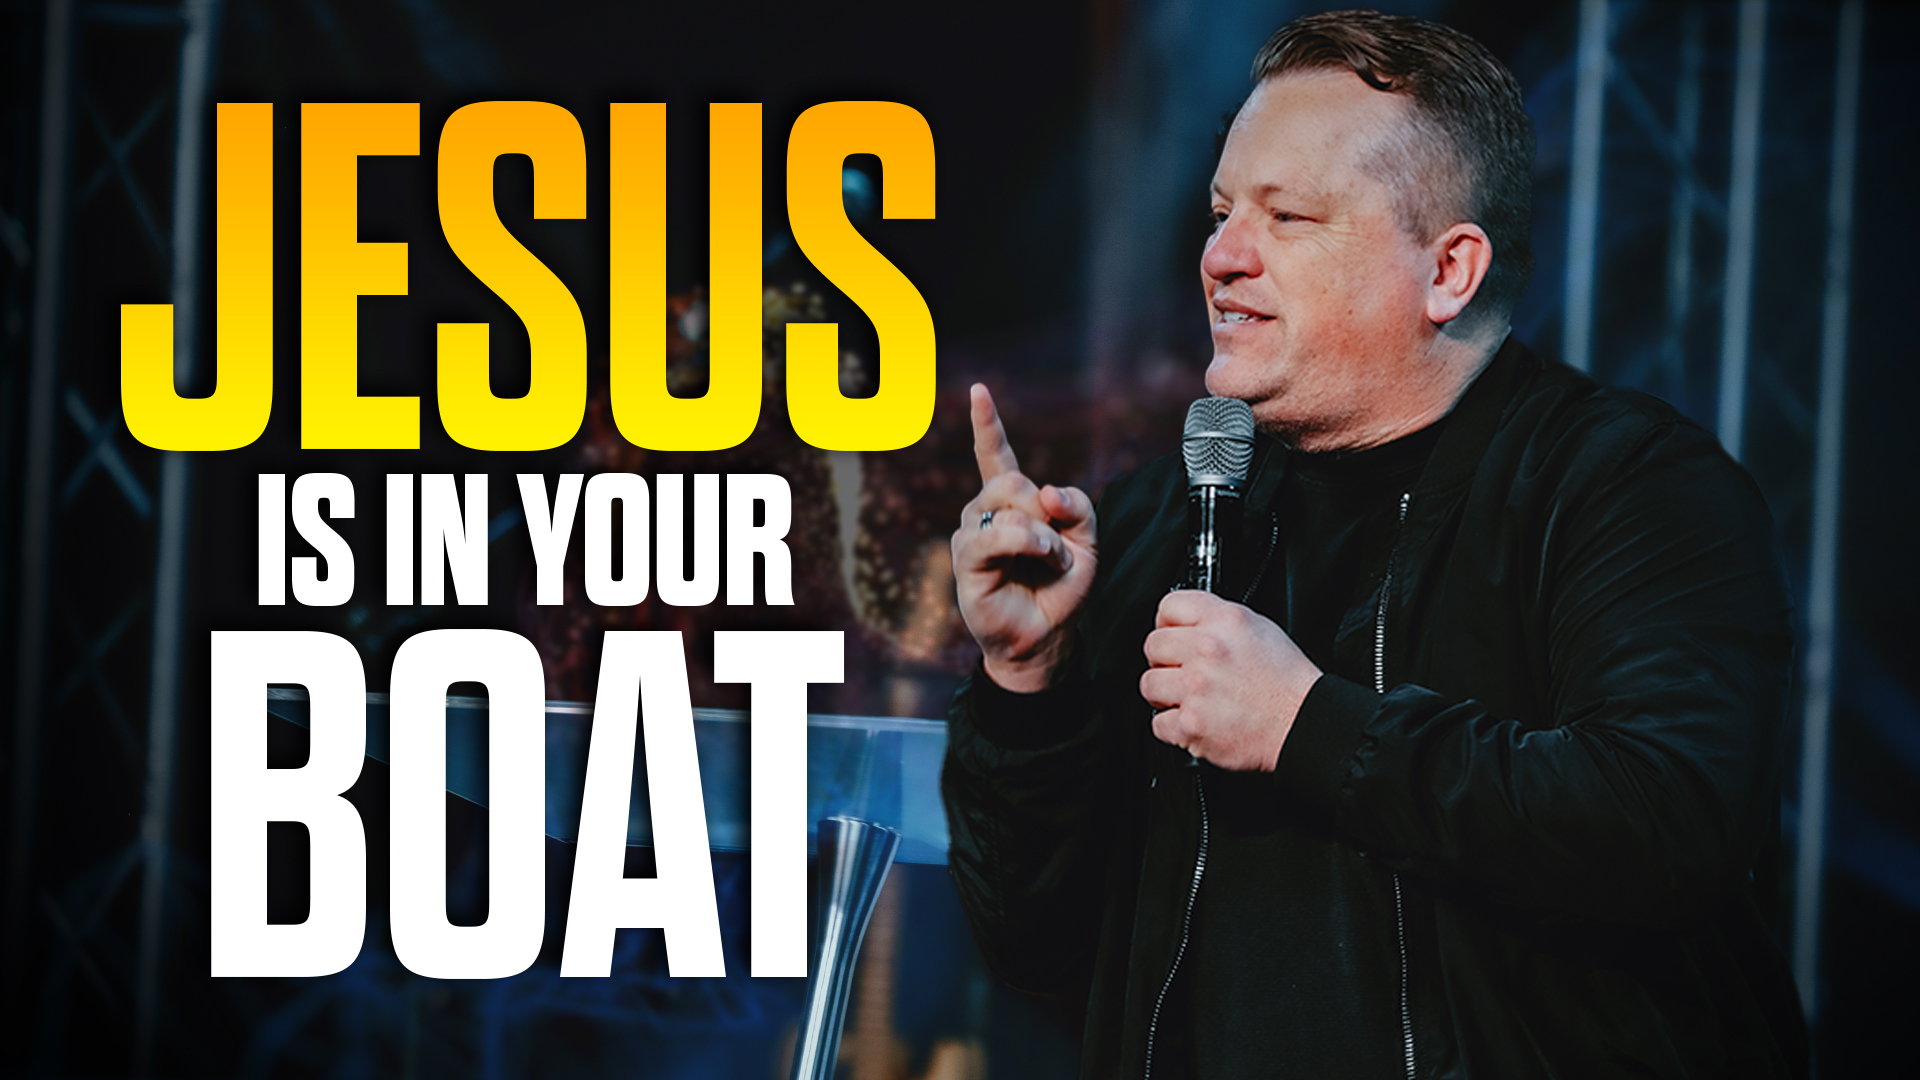 Featured image for “Jesus is in Your Boat”